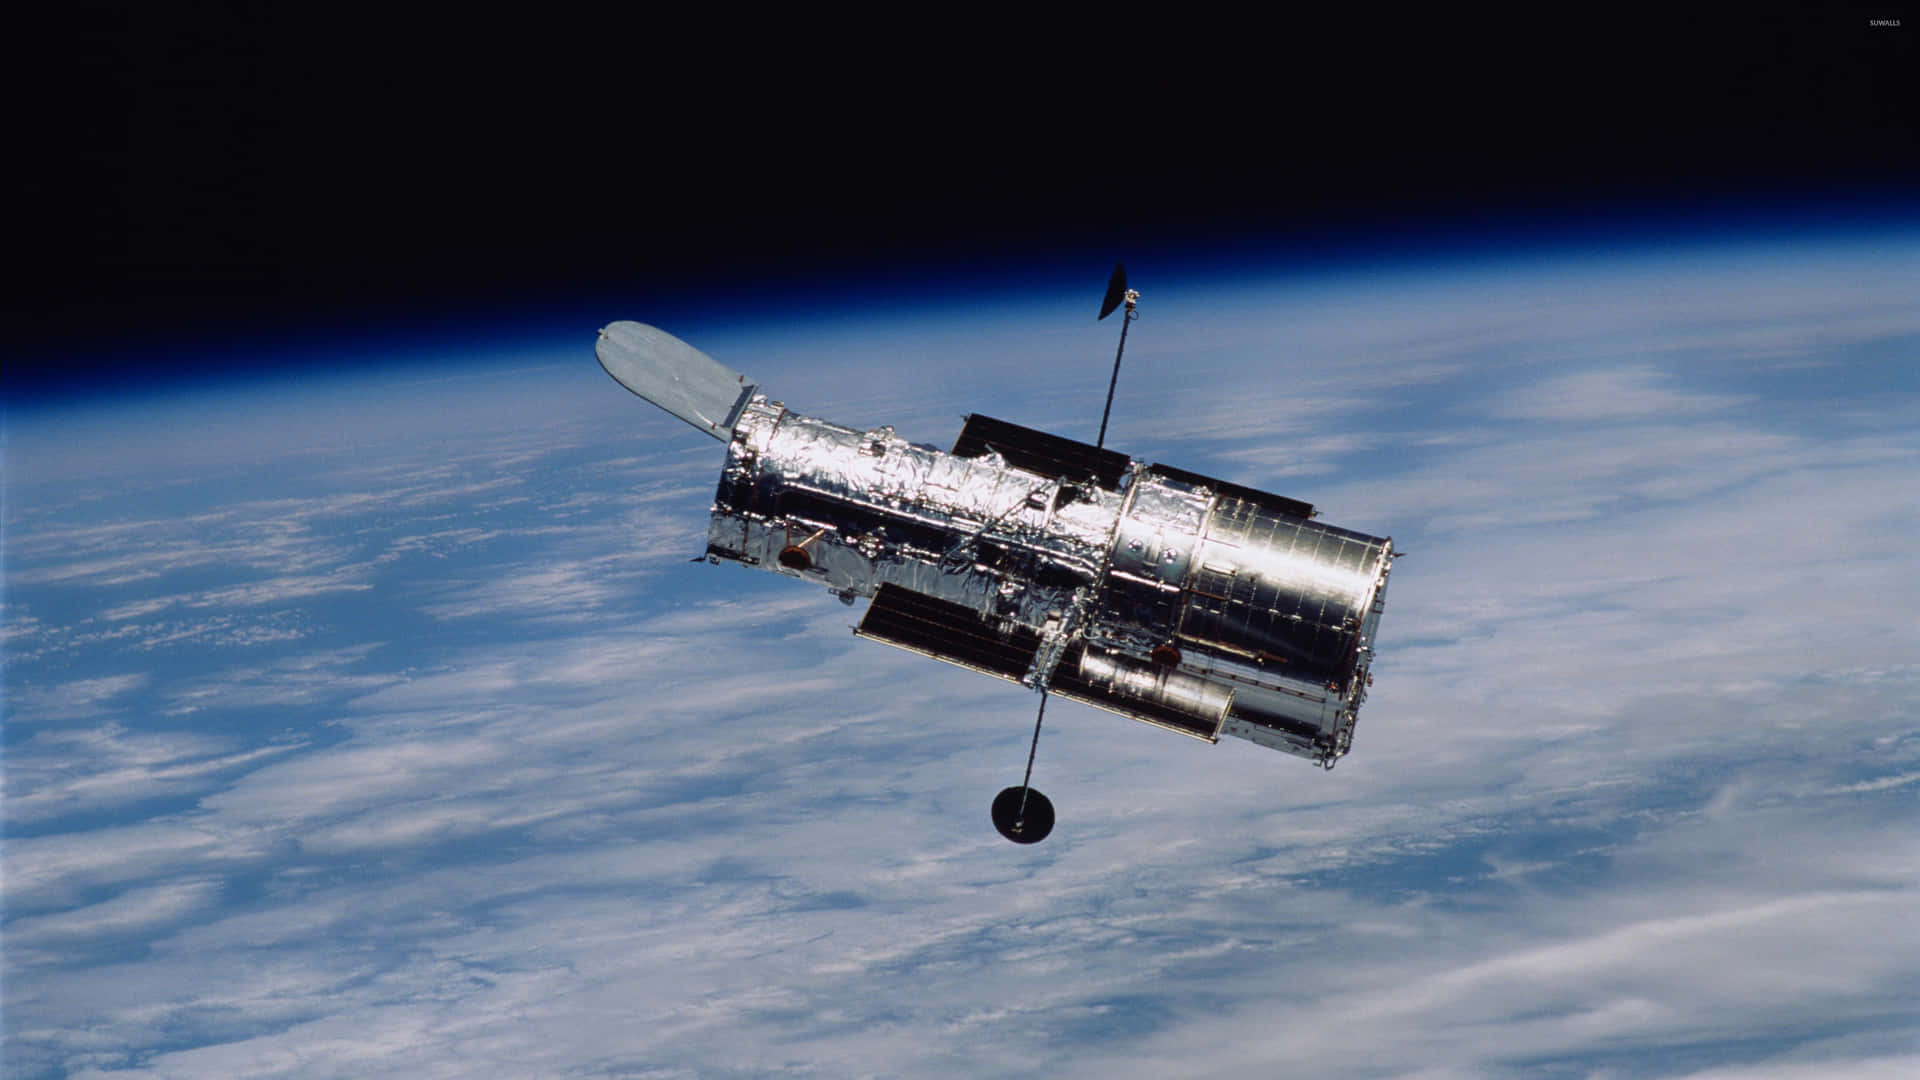 Stunning Capture from Hubble Space Telescope Wallpaper